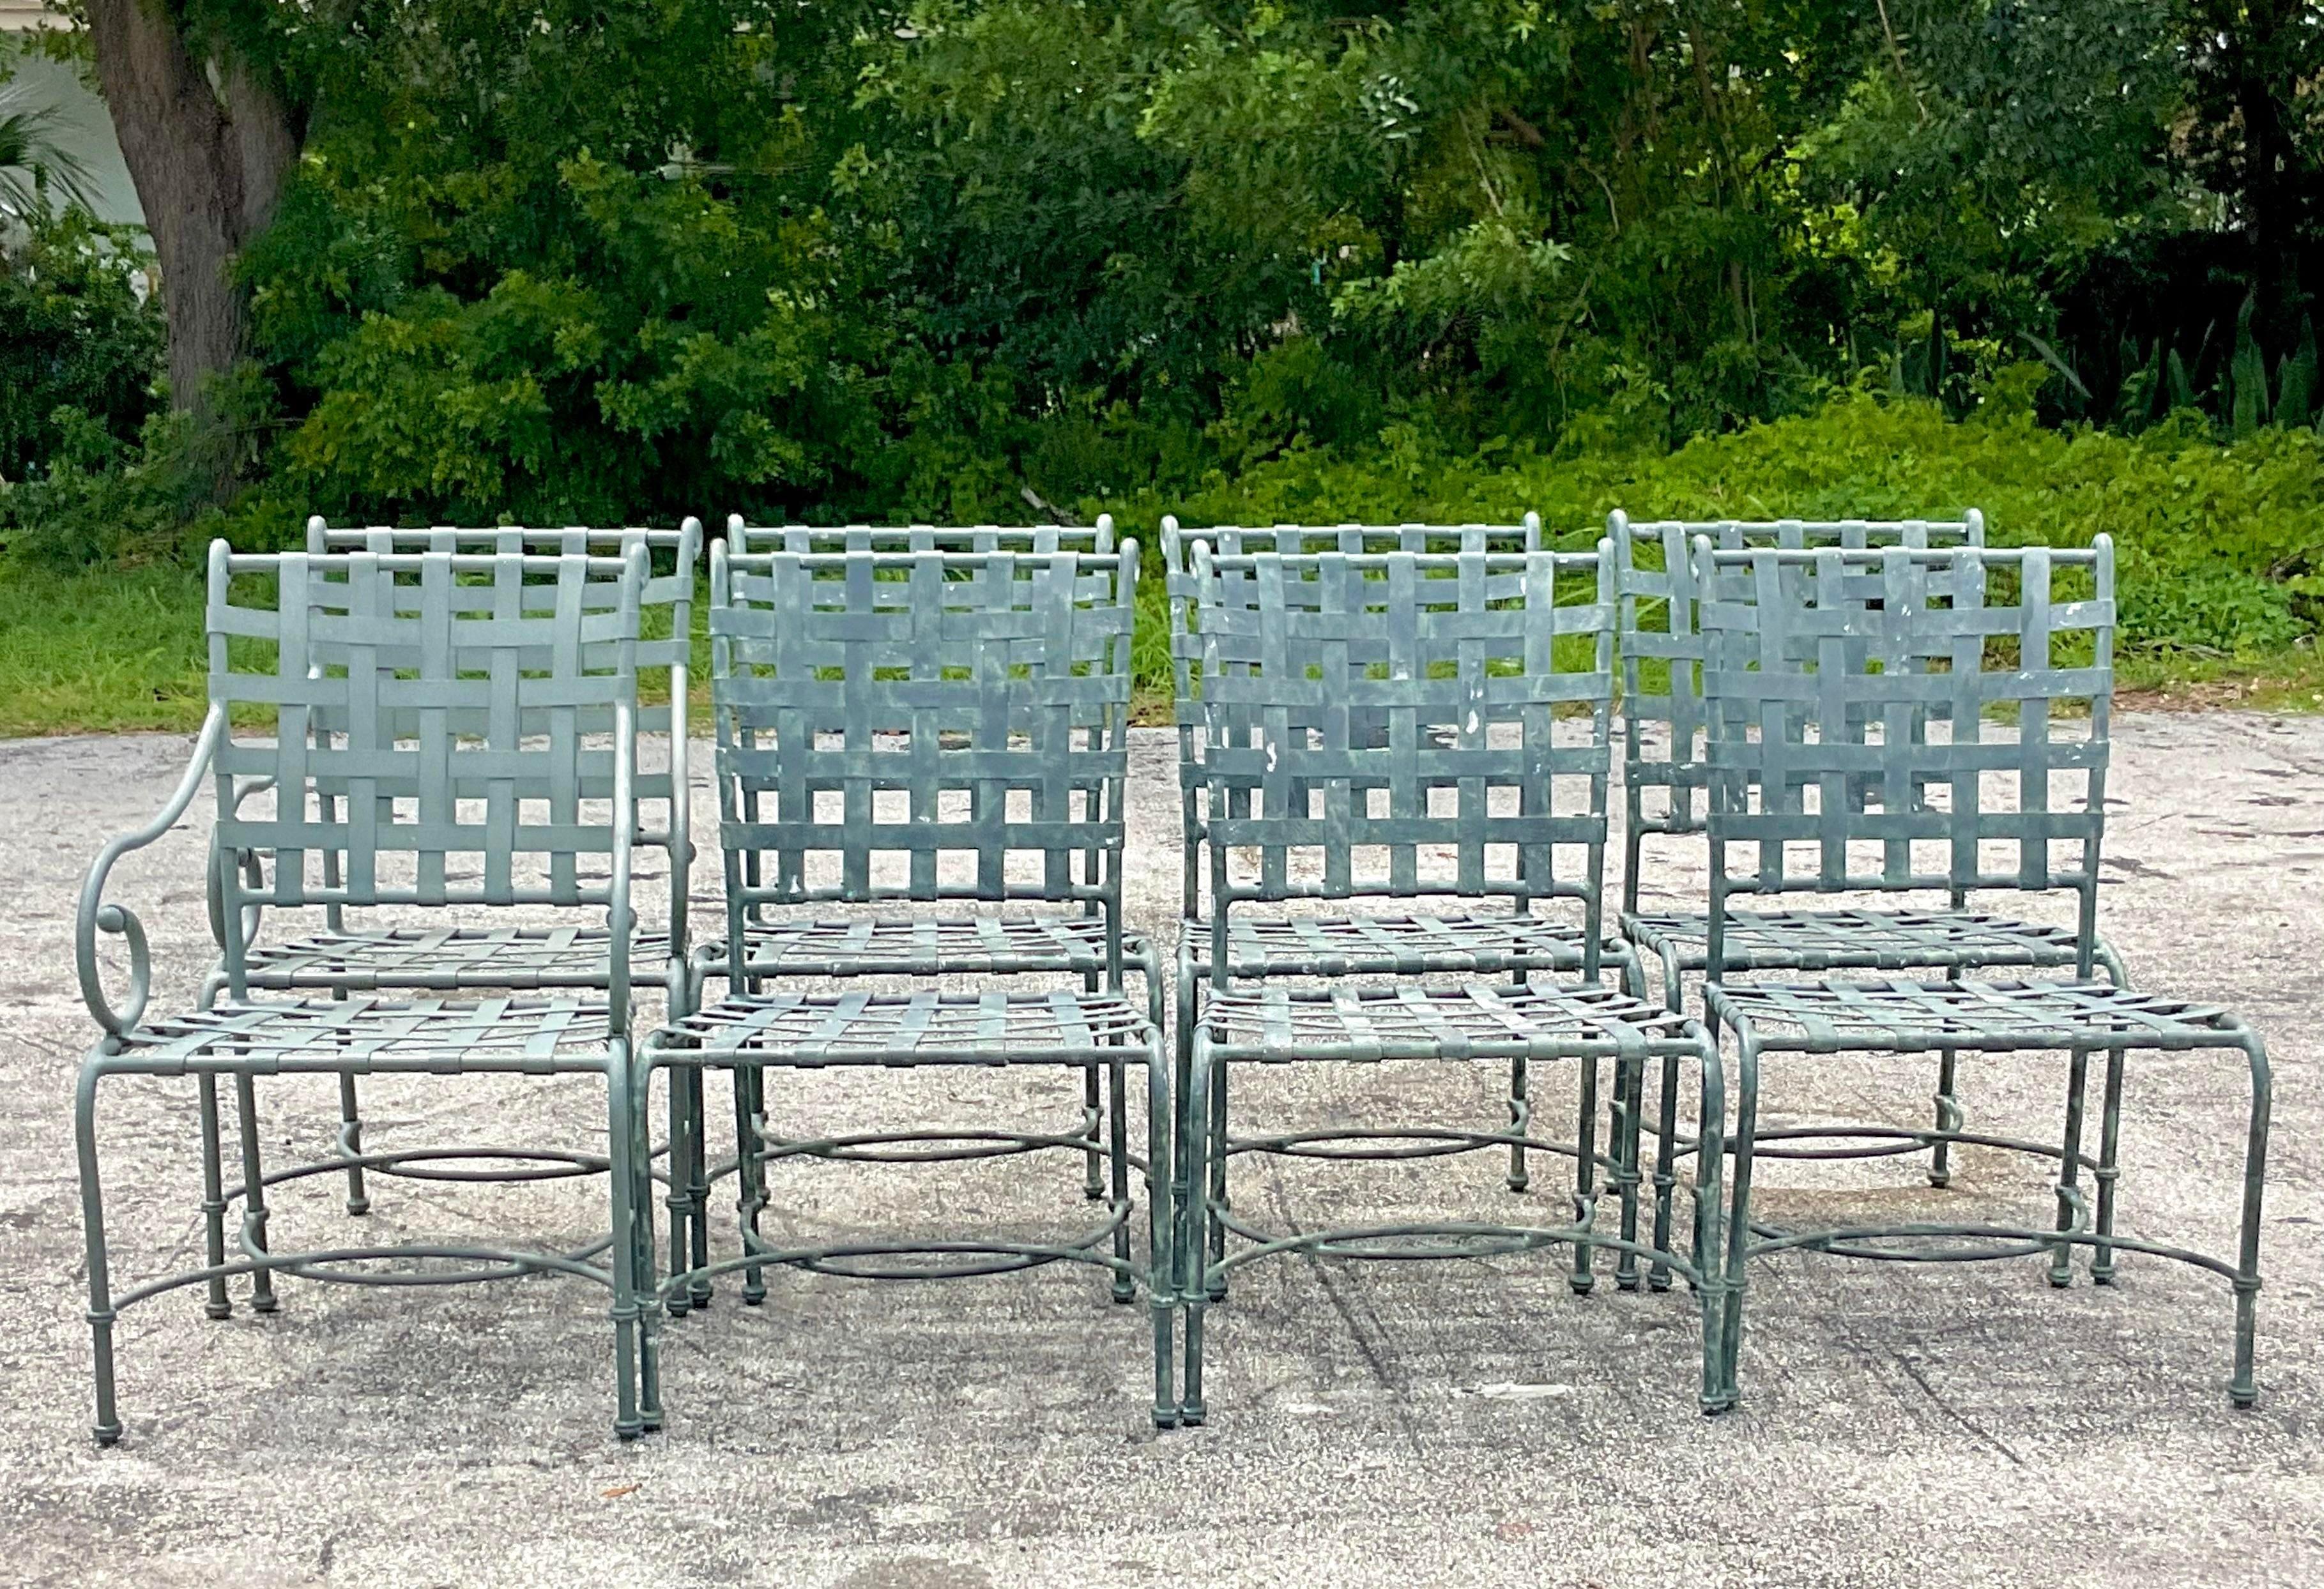 A fantastic set of 8 vintage Coastal outdoor dining chairs. Made by the iconic Brown Jordan group and tagged on the back. A chic verdigris finish on a cast aluminum frame. The coveted “Florentine” pattern. 6 more chairs also available on my page.